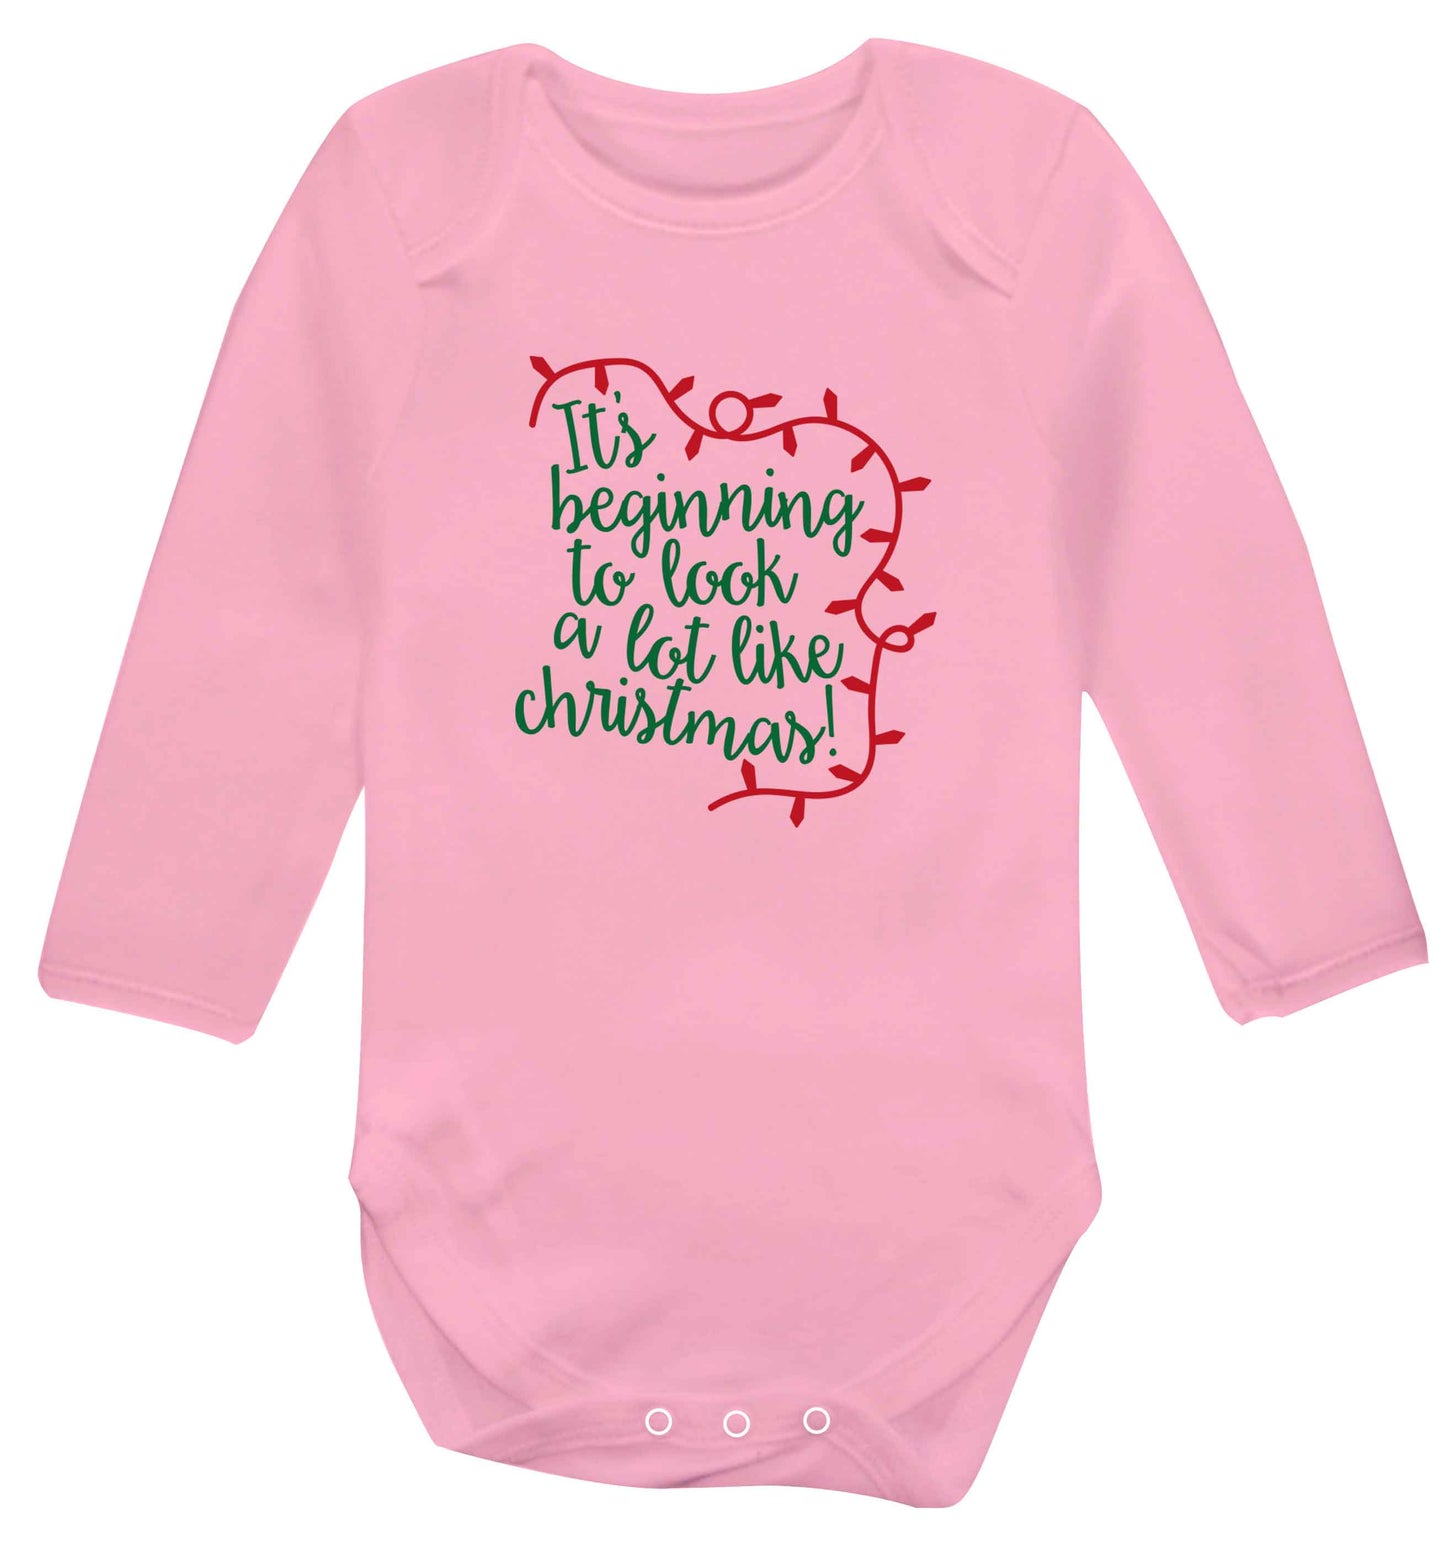 It's beginning to look a lot like Christmas baby vest long sleeved pale pink 6-12 months